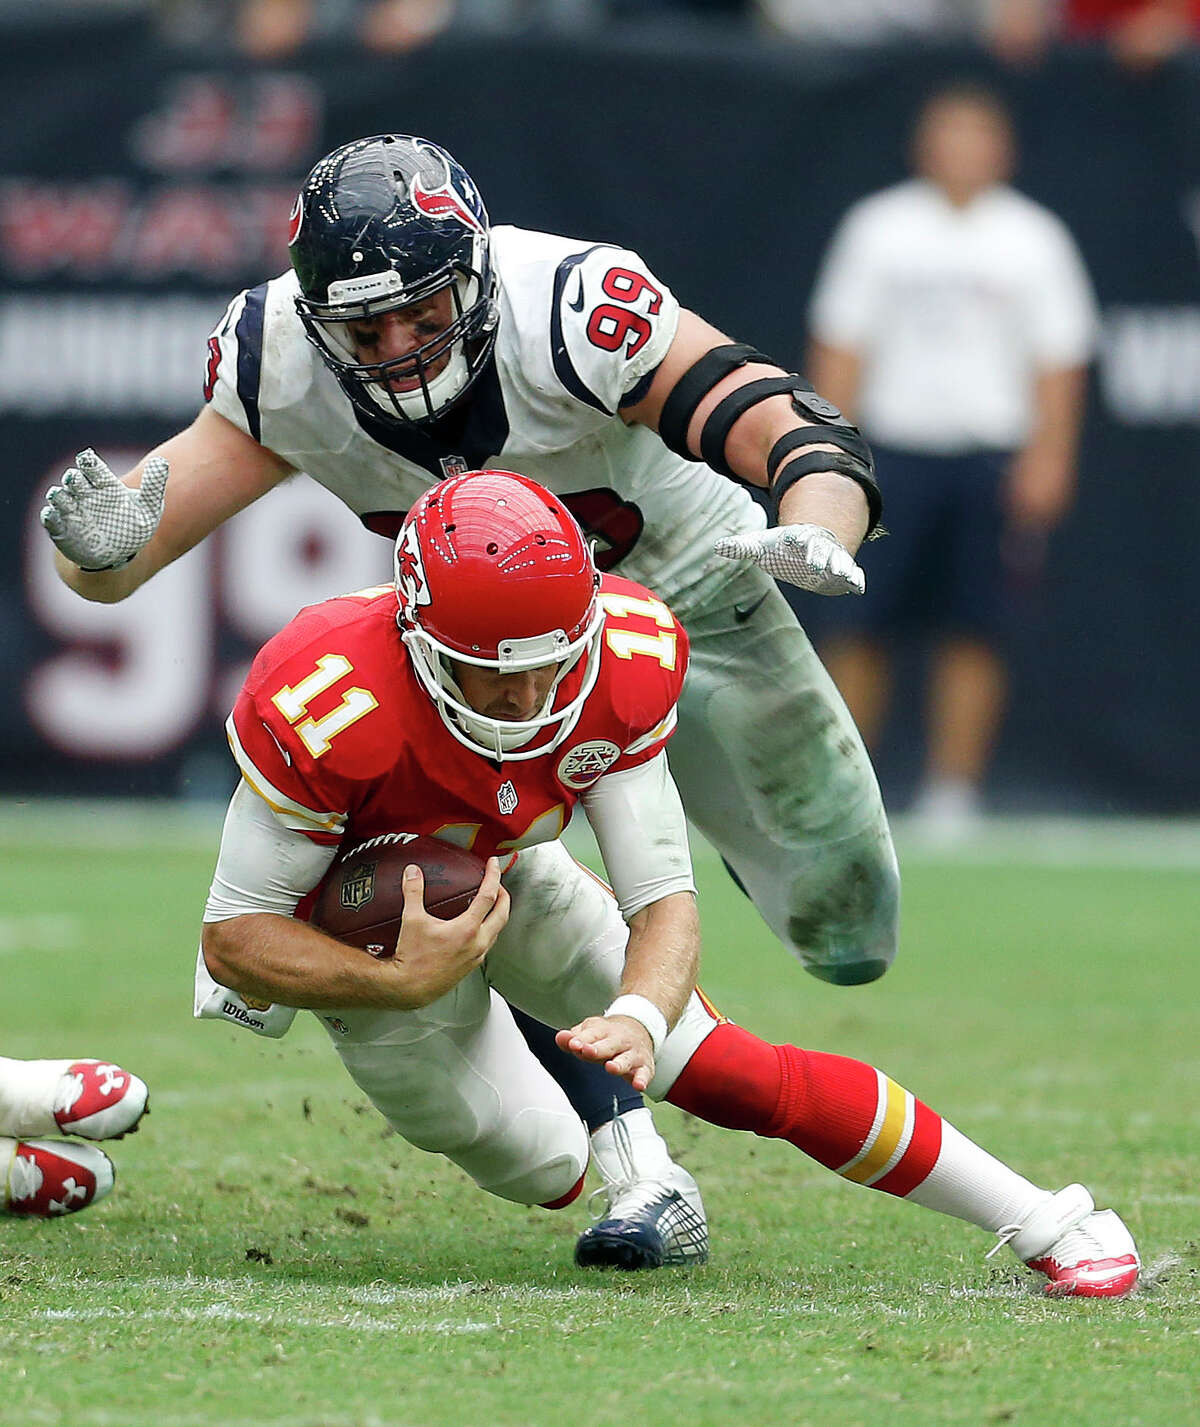 J.J. Watt (99) got the better of Chiefs quarterback Alex Smith on this sack last September, but Kansas City won the game 27-20, then beat the Texans 30-0 in the playoffs.